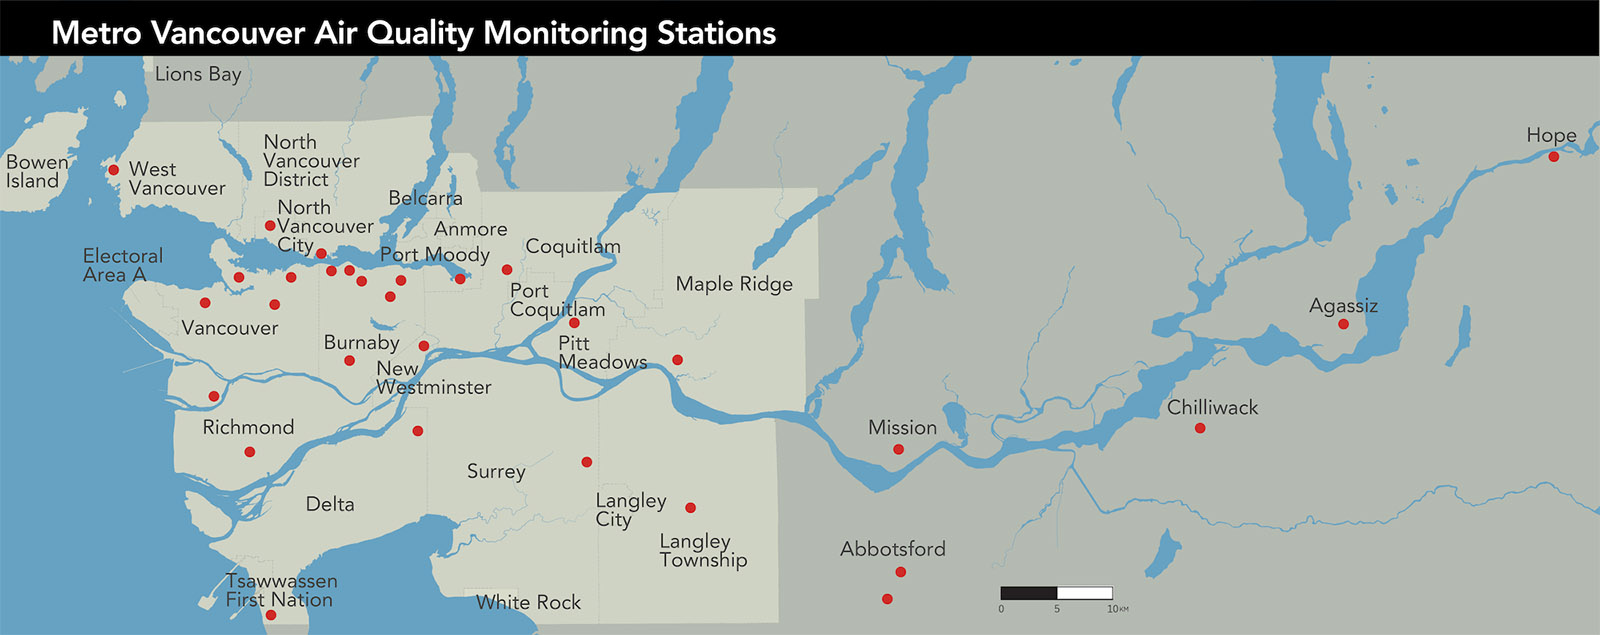 Metro Vancouver Air Quality Monitoring Stations